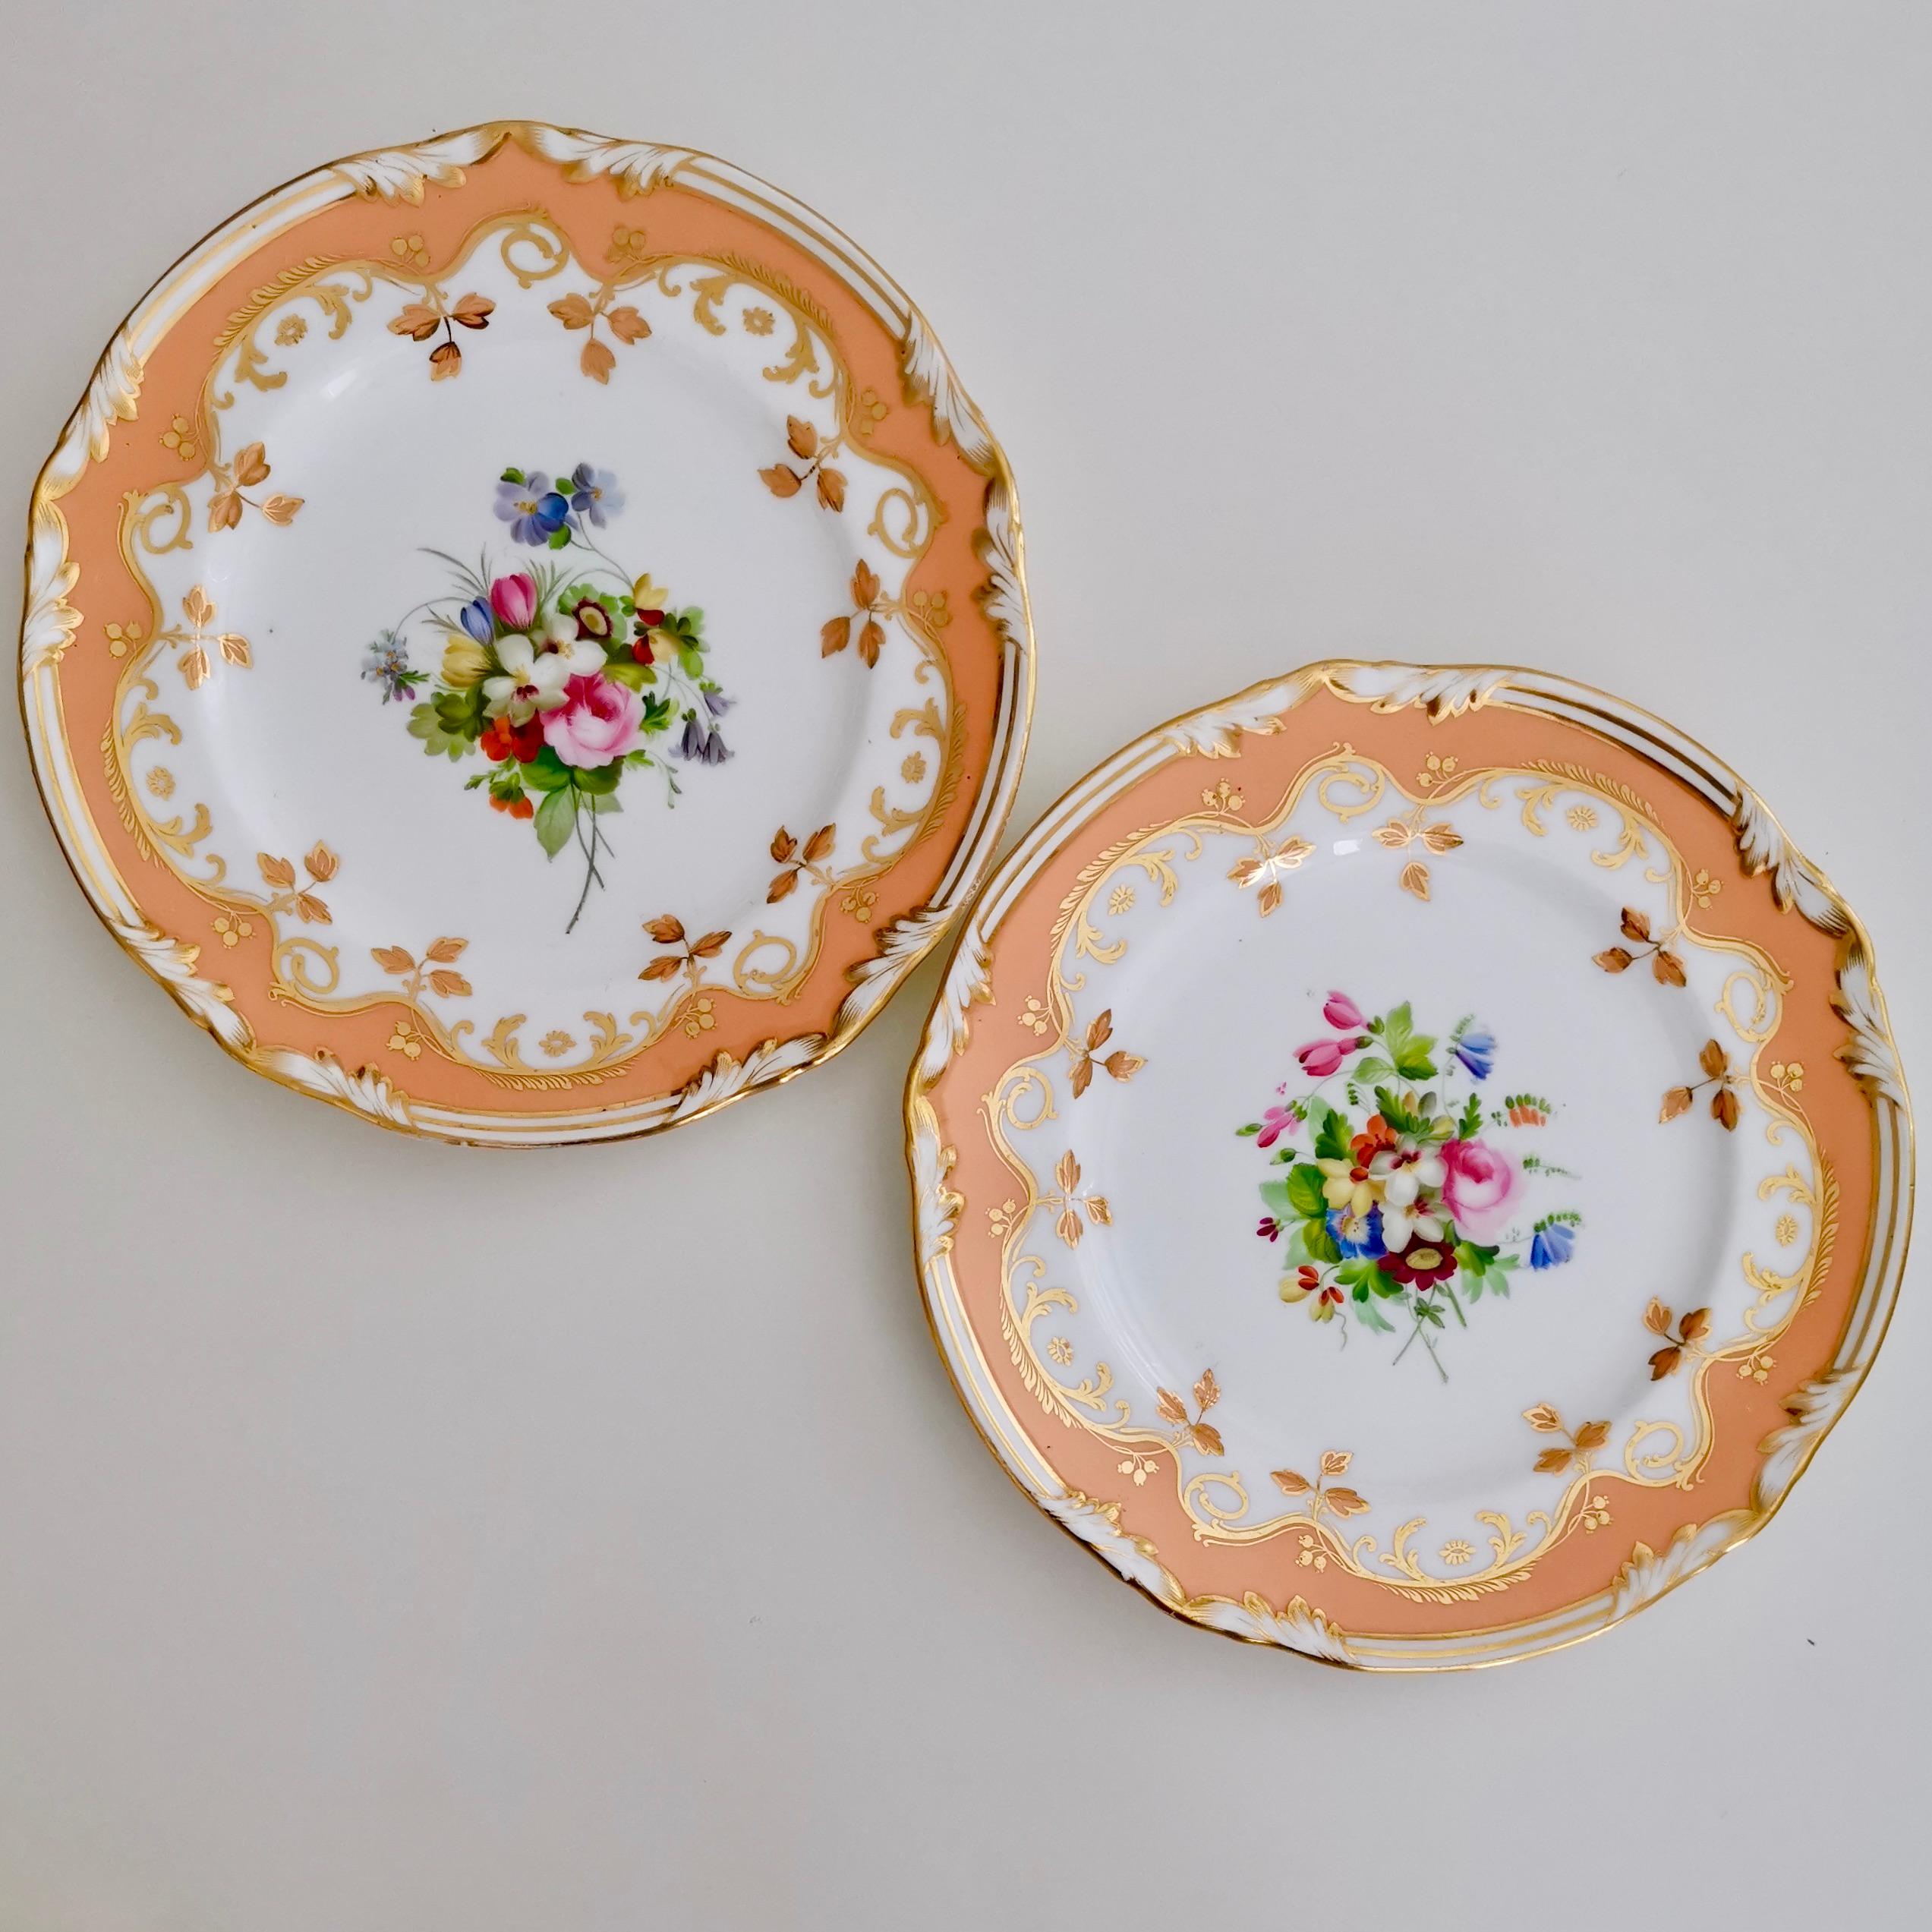 Coalport Porcelain Plate, Peach Ground and Flowers by Thomas Dixon, '1' 1